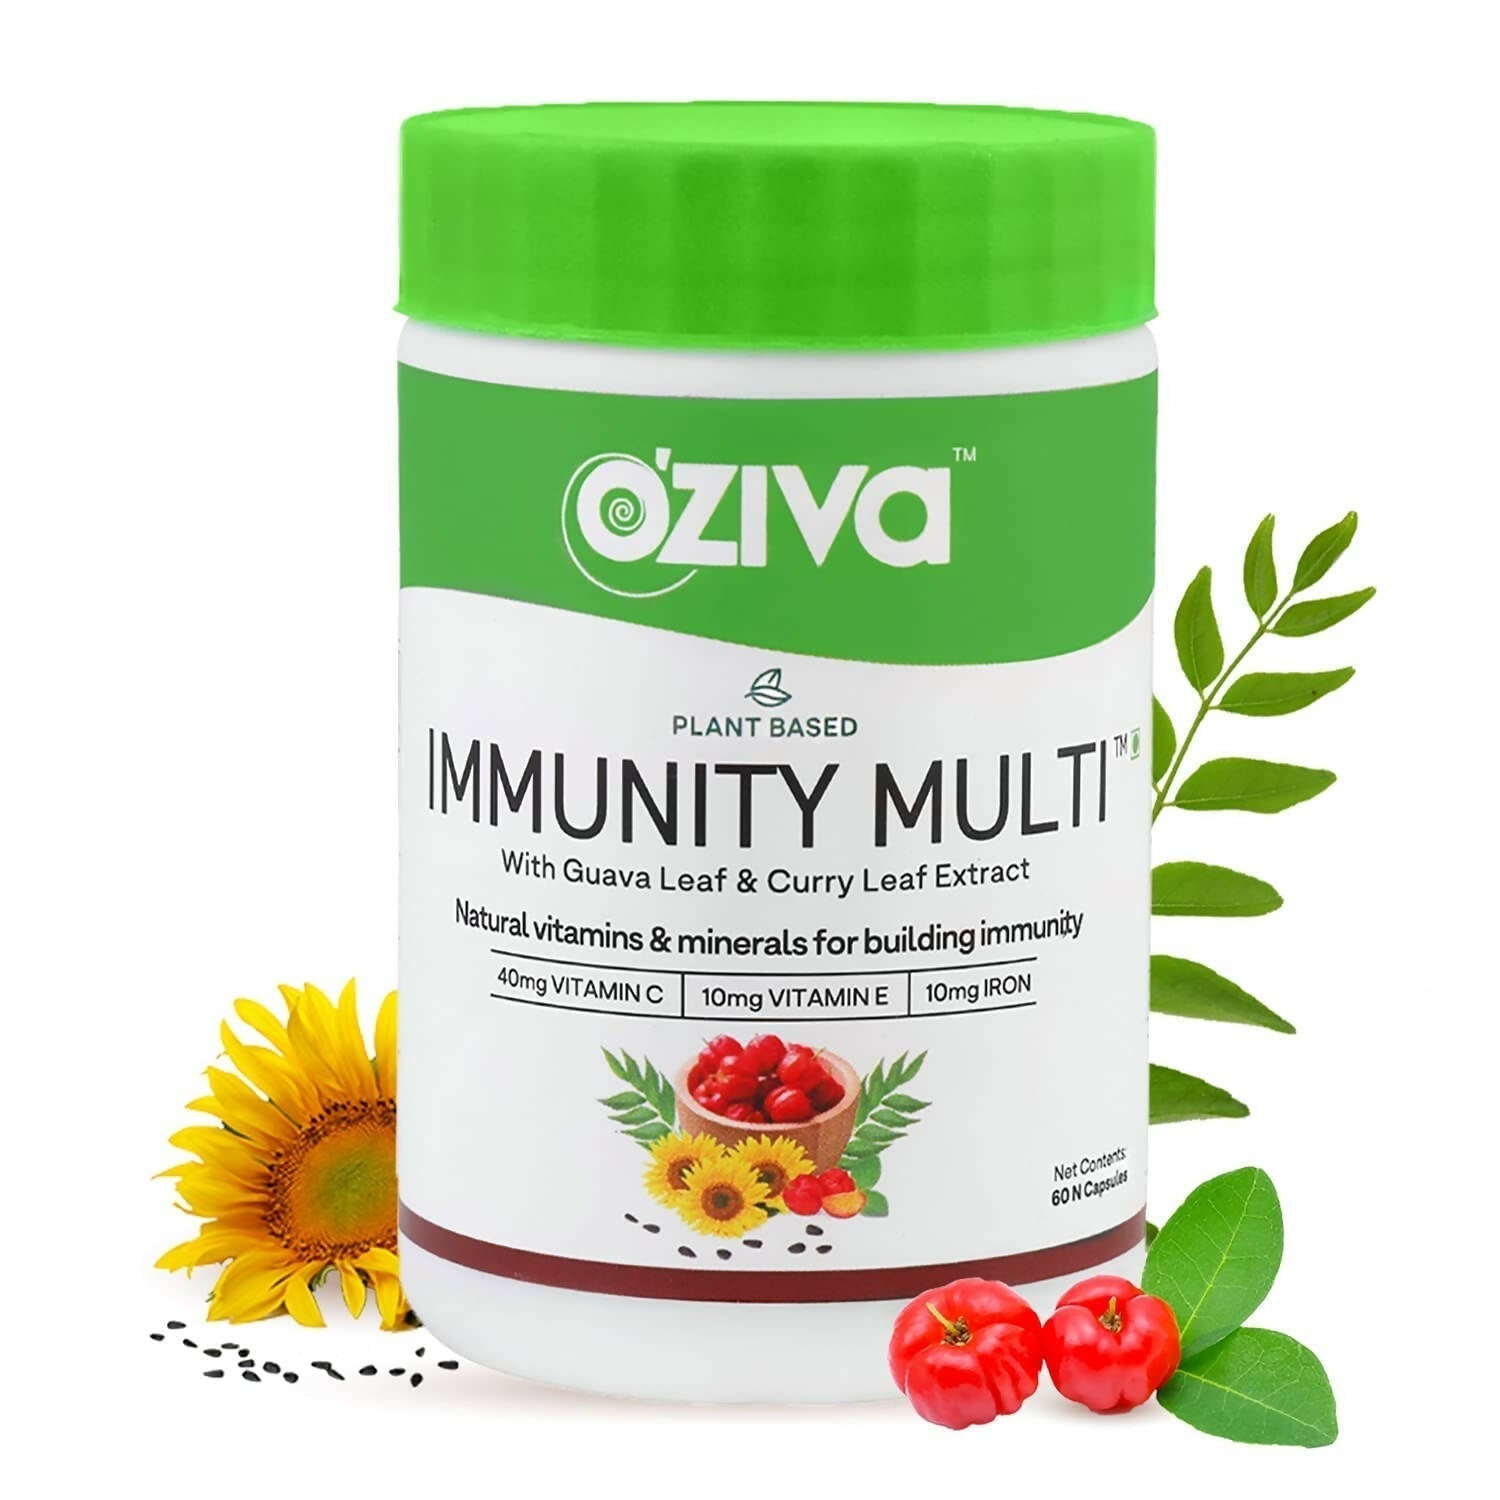 OZiva Plant Based Immunity Multivitamin with Guava Leaf & Curry Leaf Extract Capsules - BUDEN